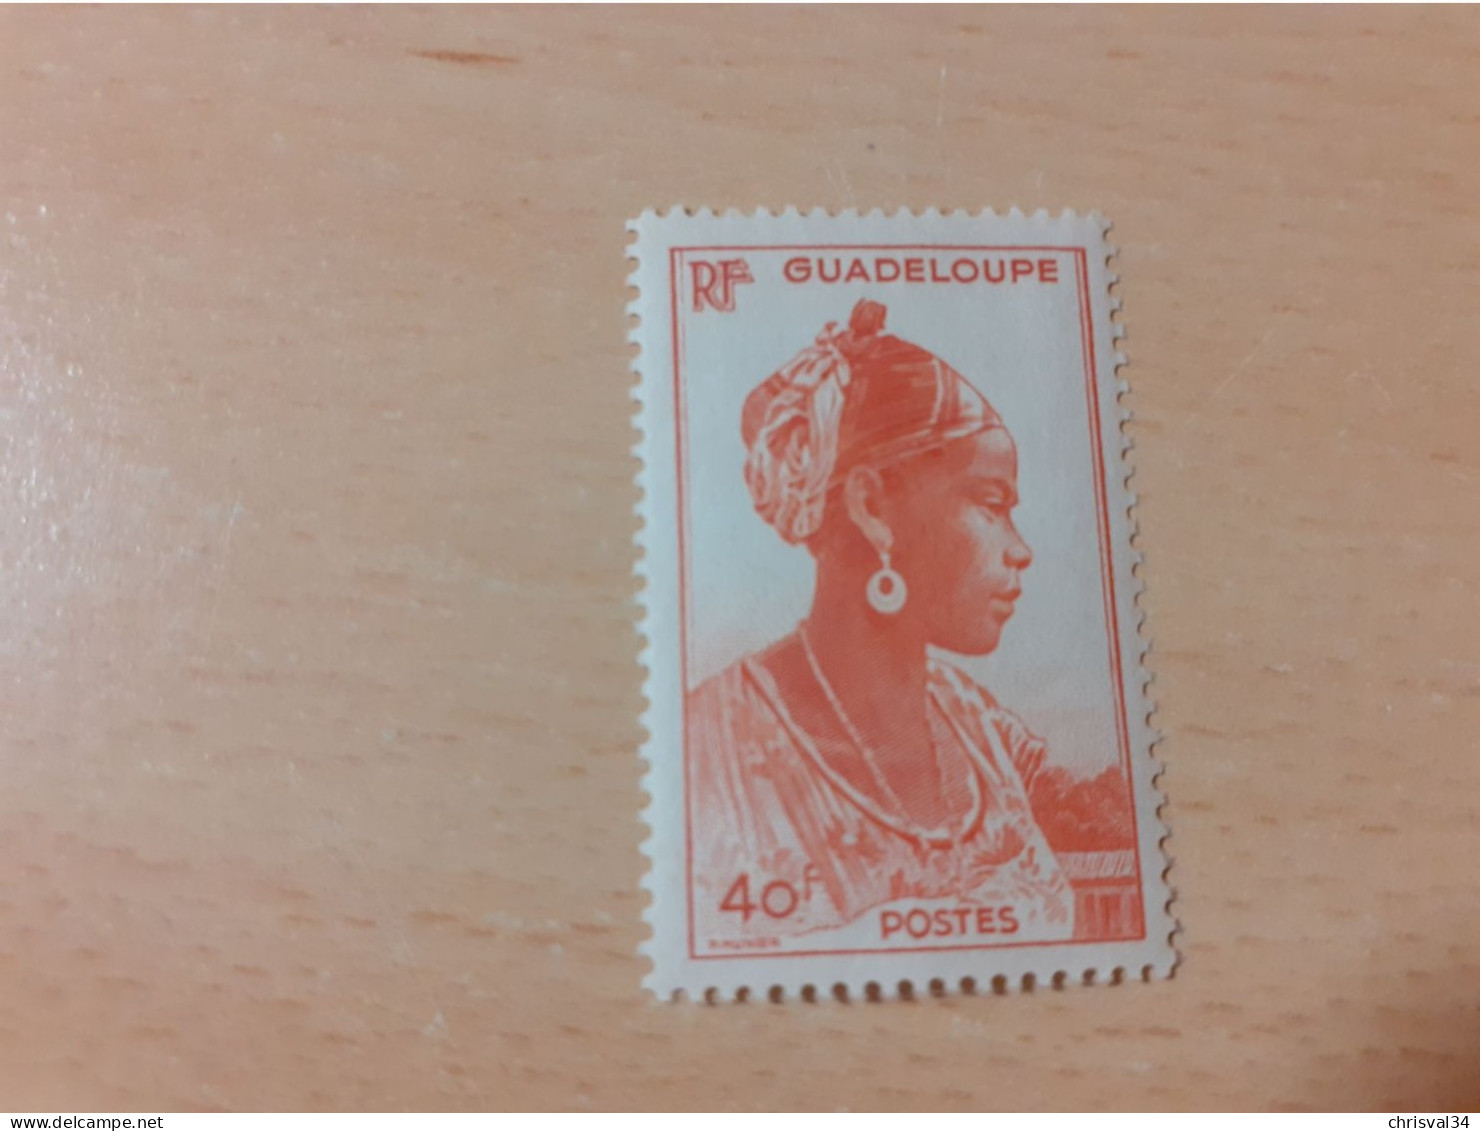 TIMBRE   GUADELOUPE       N  213    COTE  6,50   EUROS  NEUF  TRACE  CHARNIERE - Ongebruikt